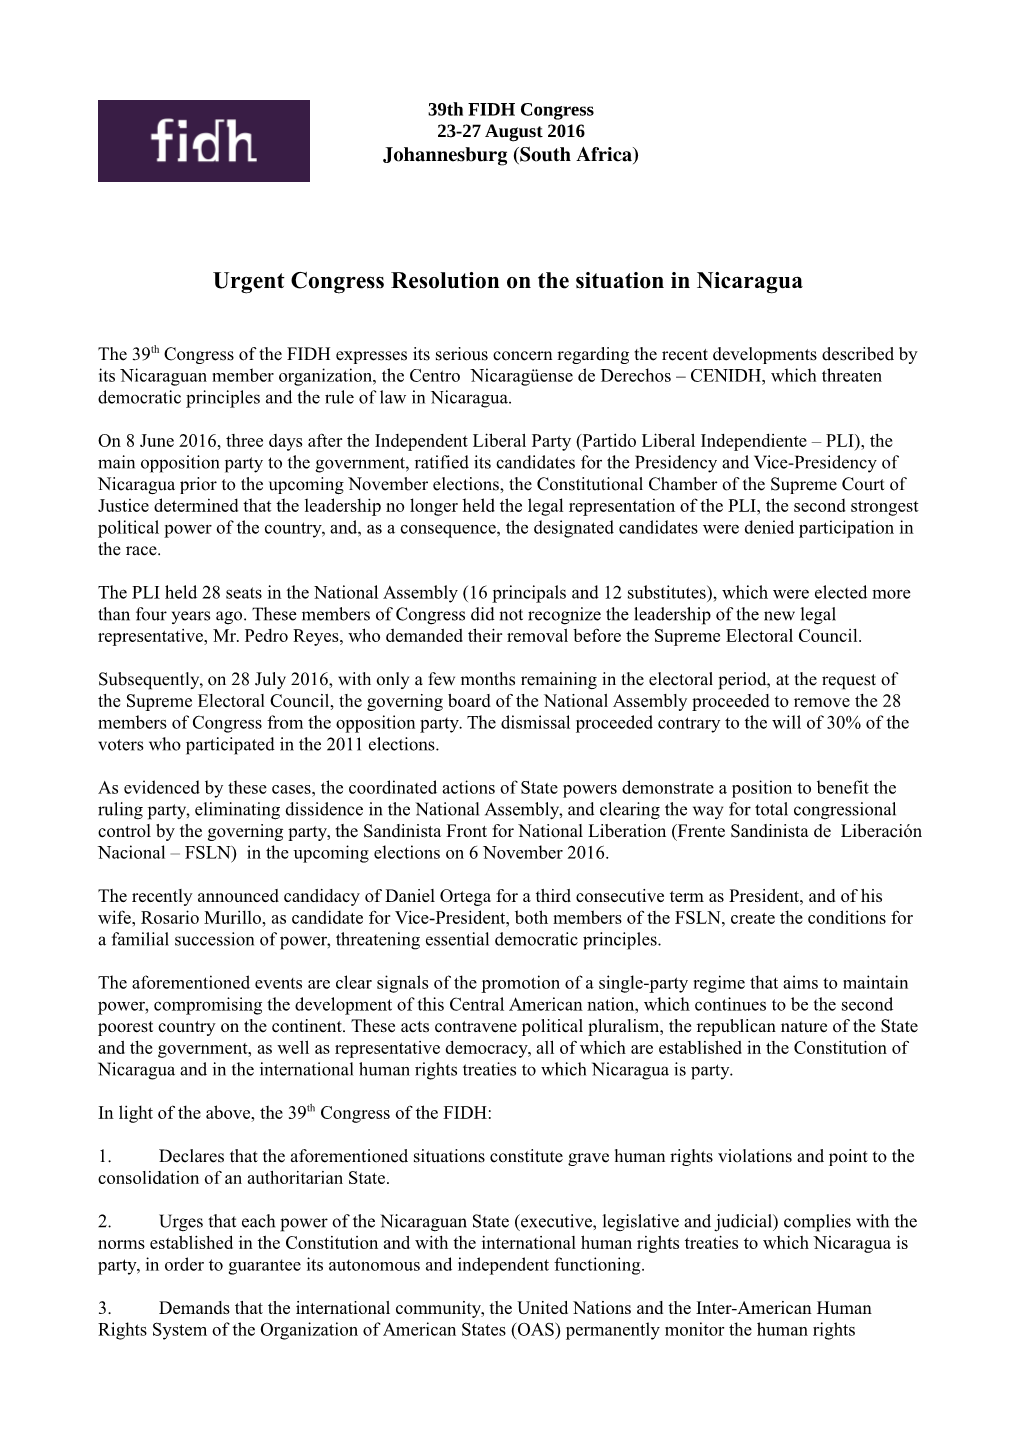 Urgent Congress Resolution on the Situation in Nicaragua